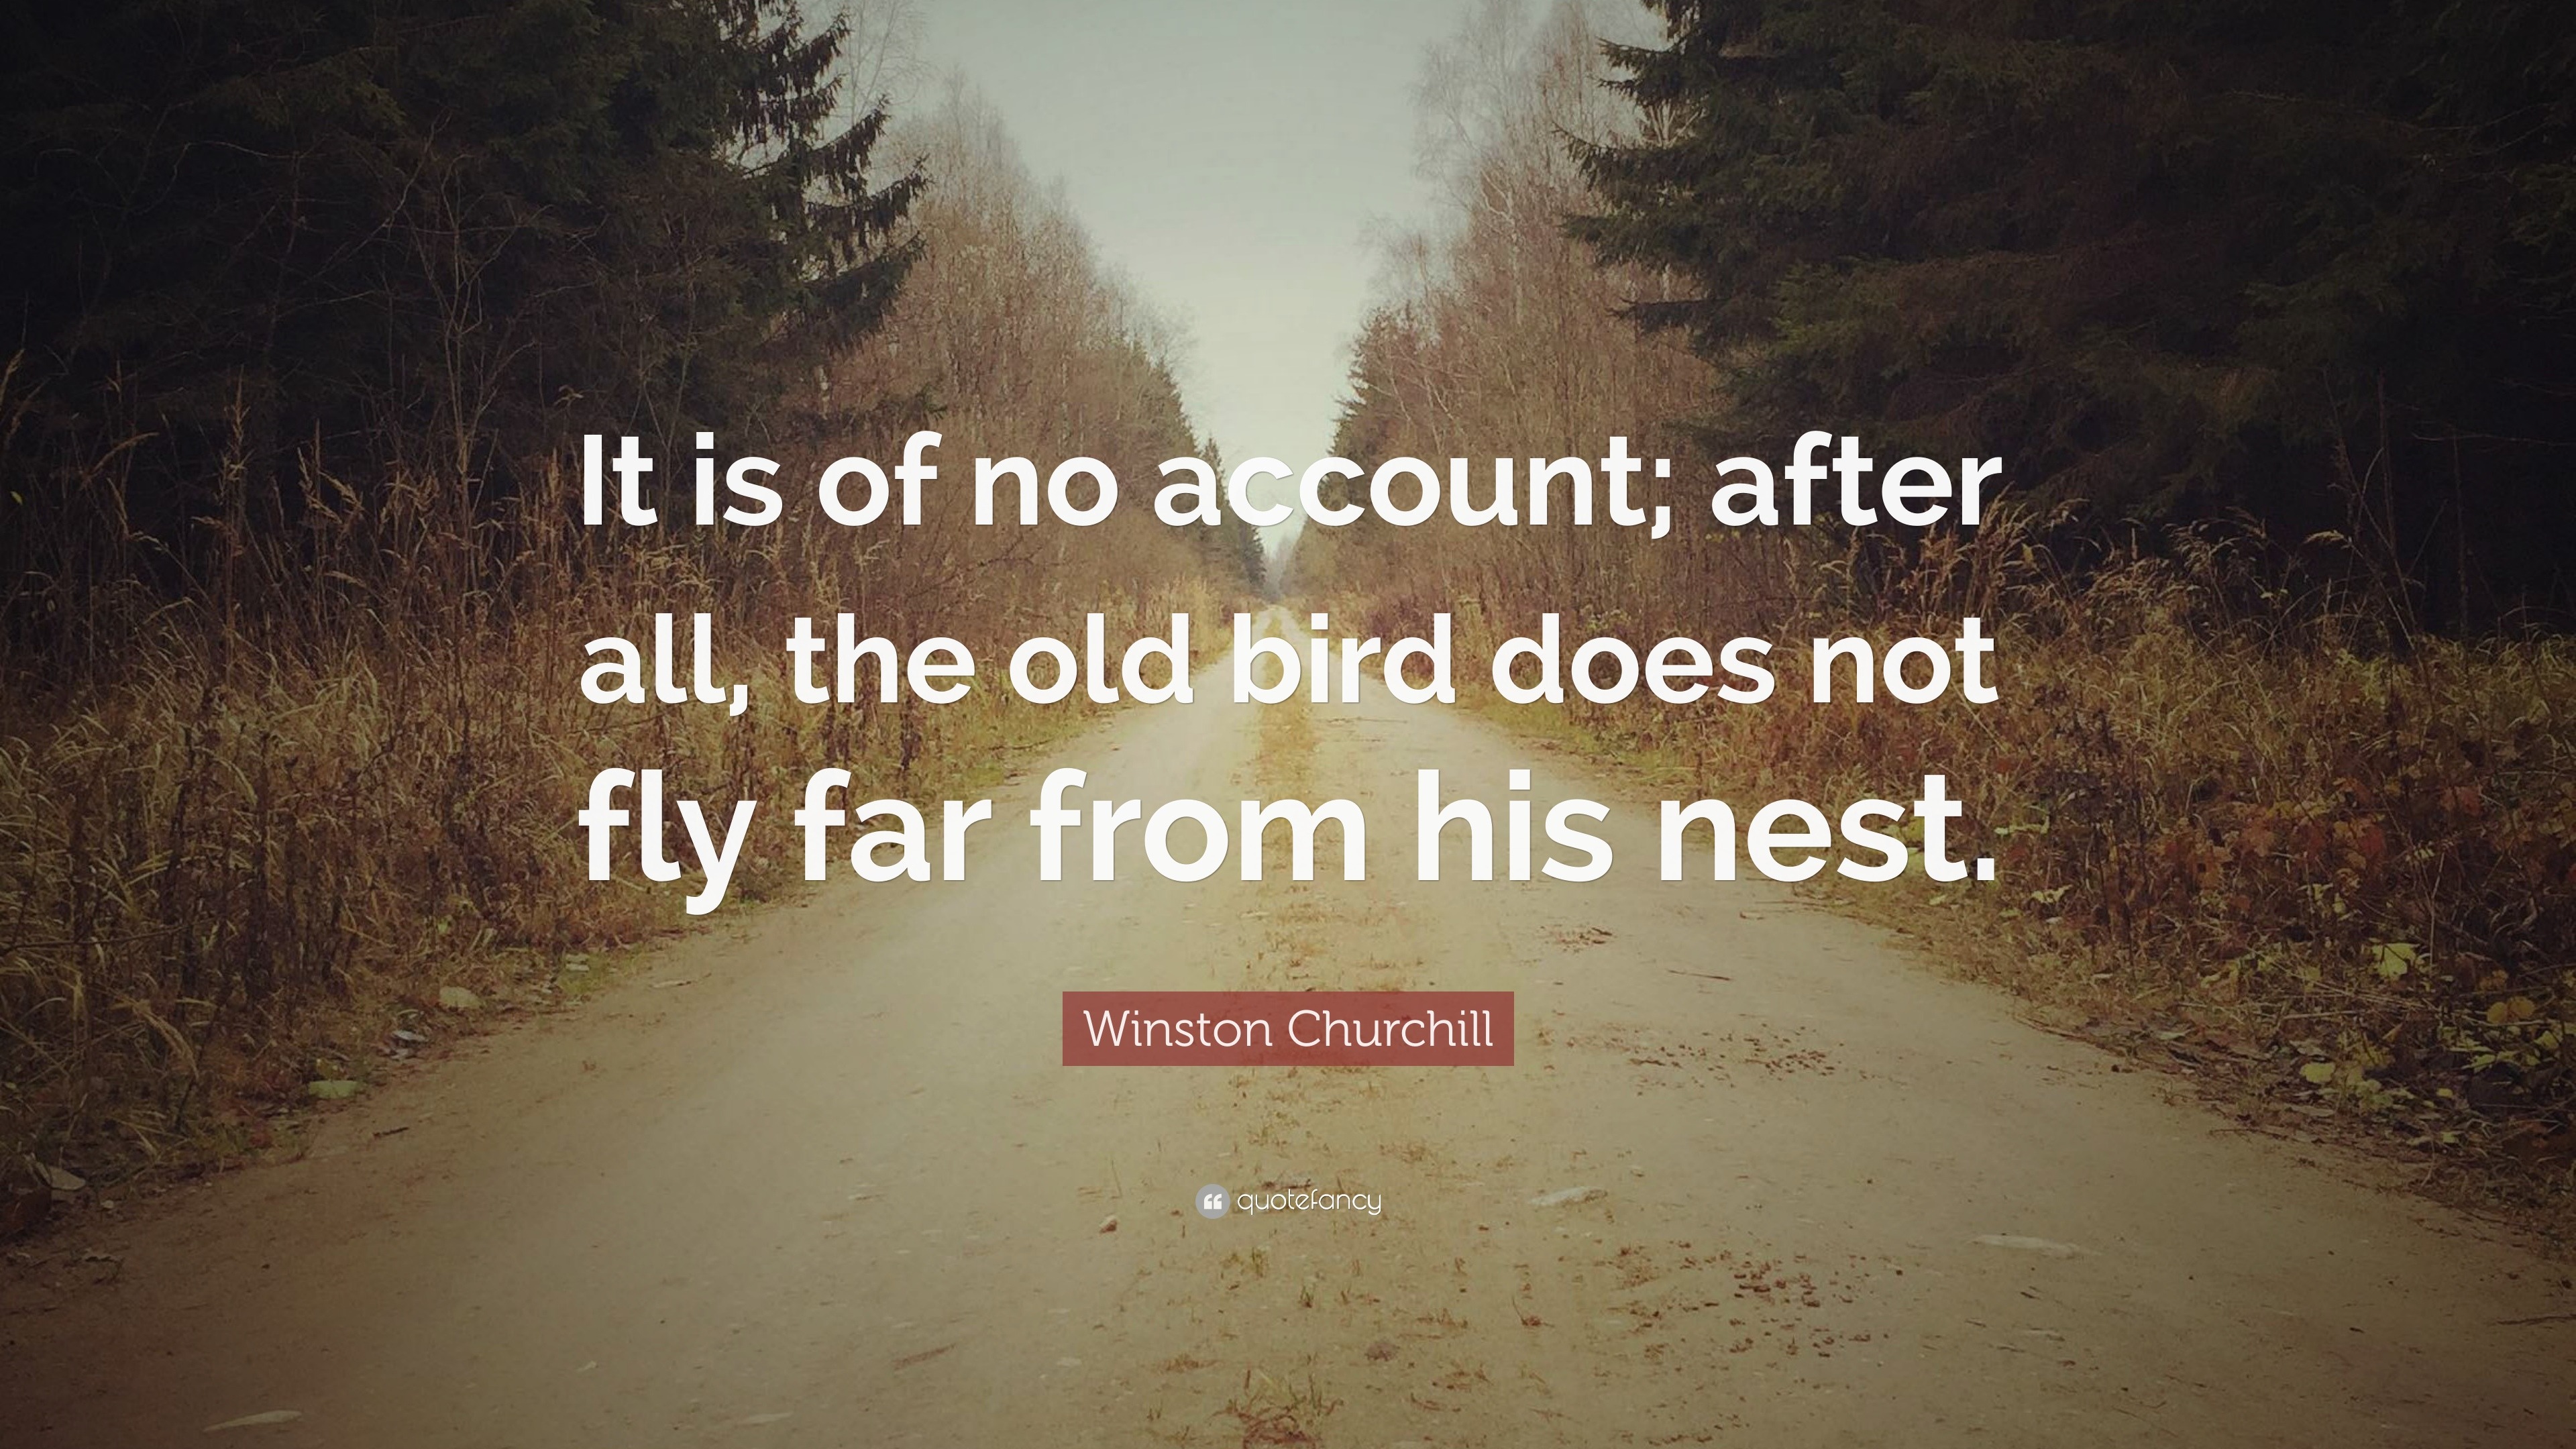 Winston Churchill Quote: “It is of no account; after all, the old bird ...